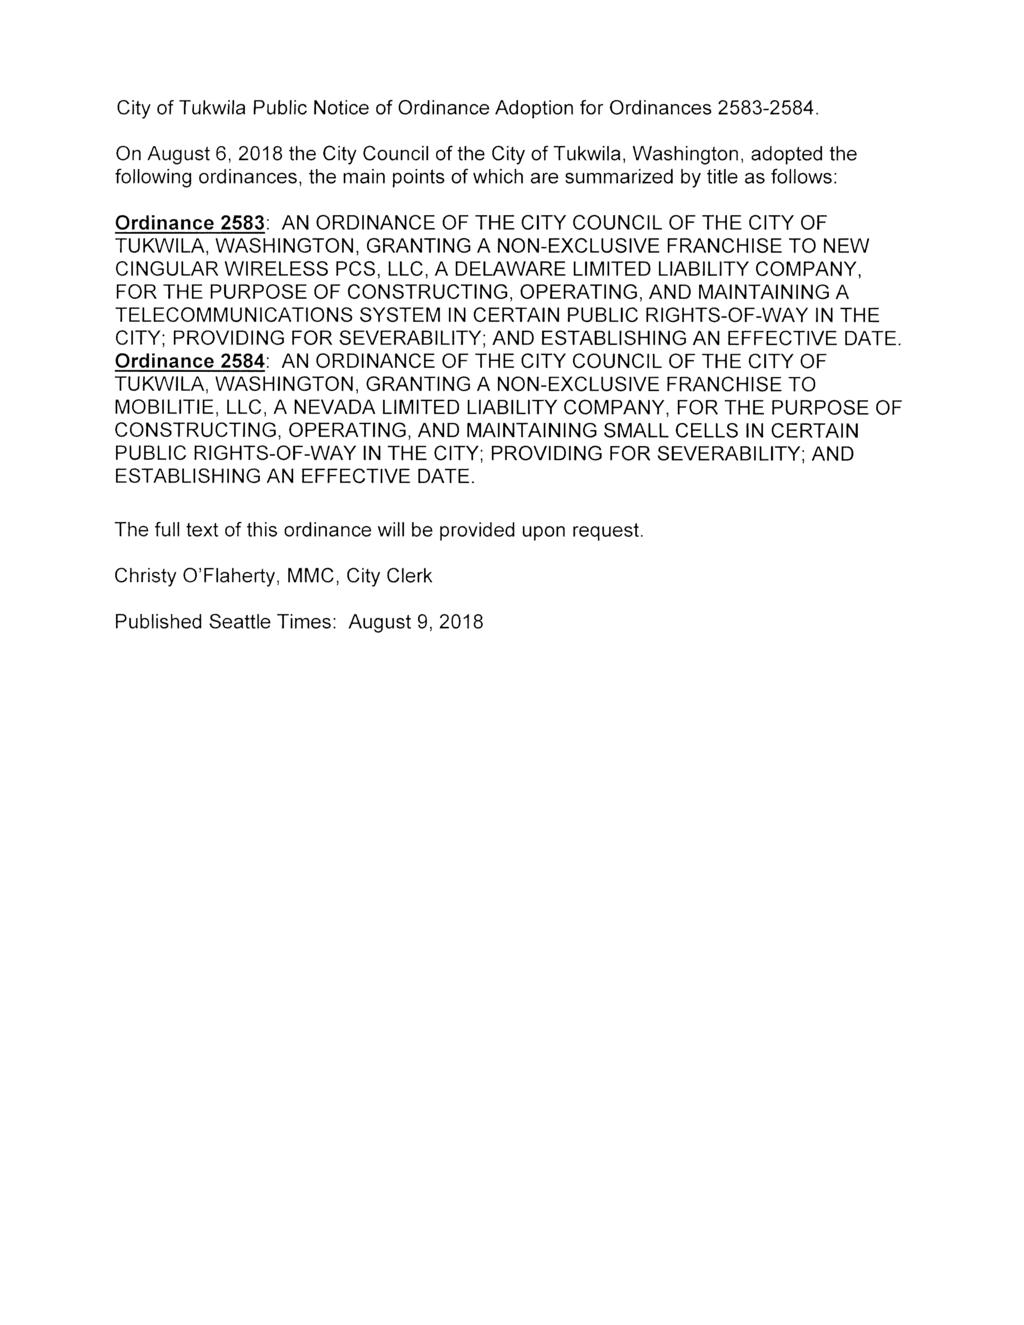 City of Tukwila Public Notice of Ordinance Adoption for Ordinances 2583-2584, On August 6, 2018 the City Council of the City of Tukwila, Washington, adopted the following ordinances, the main points